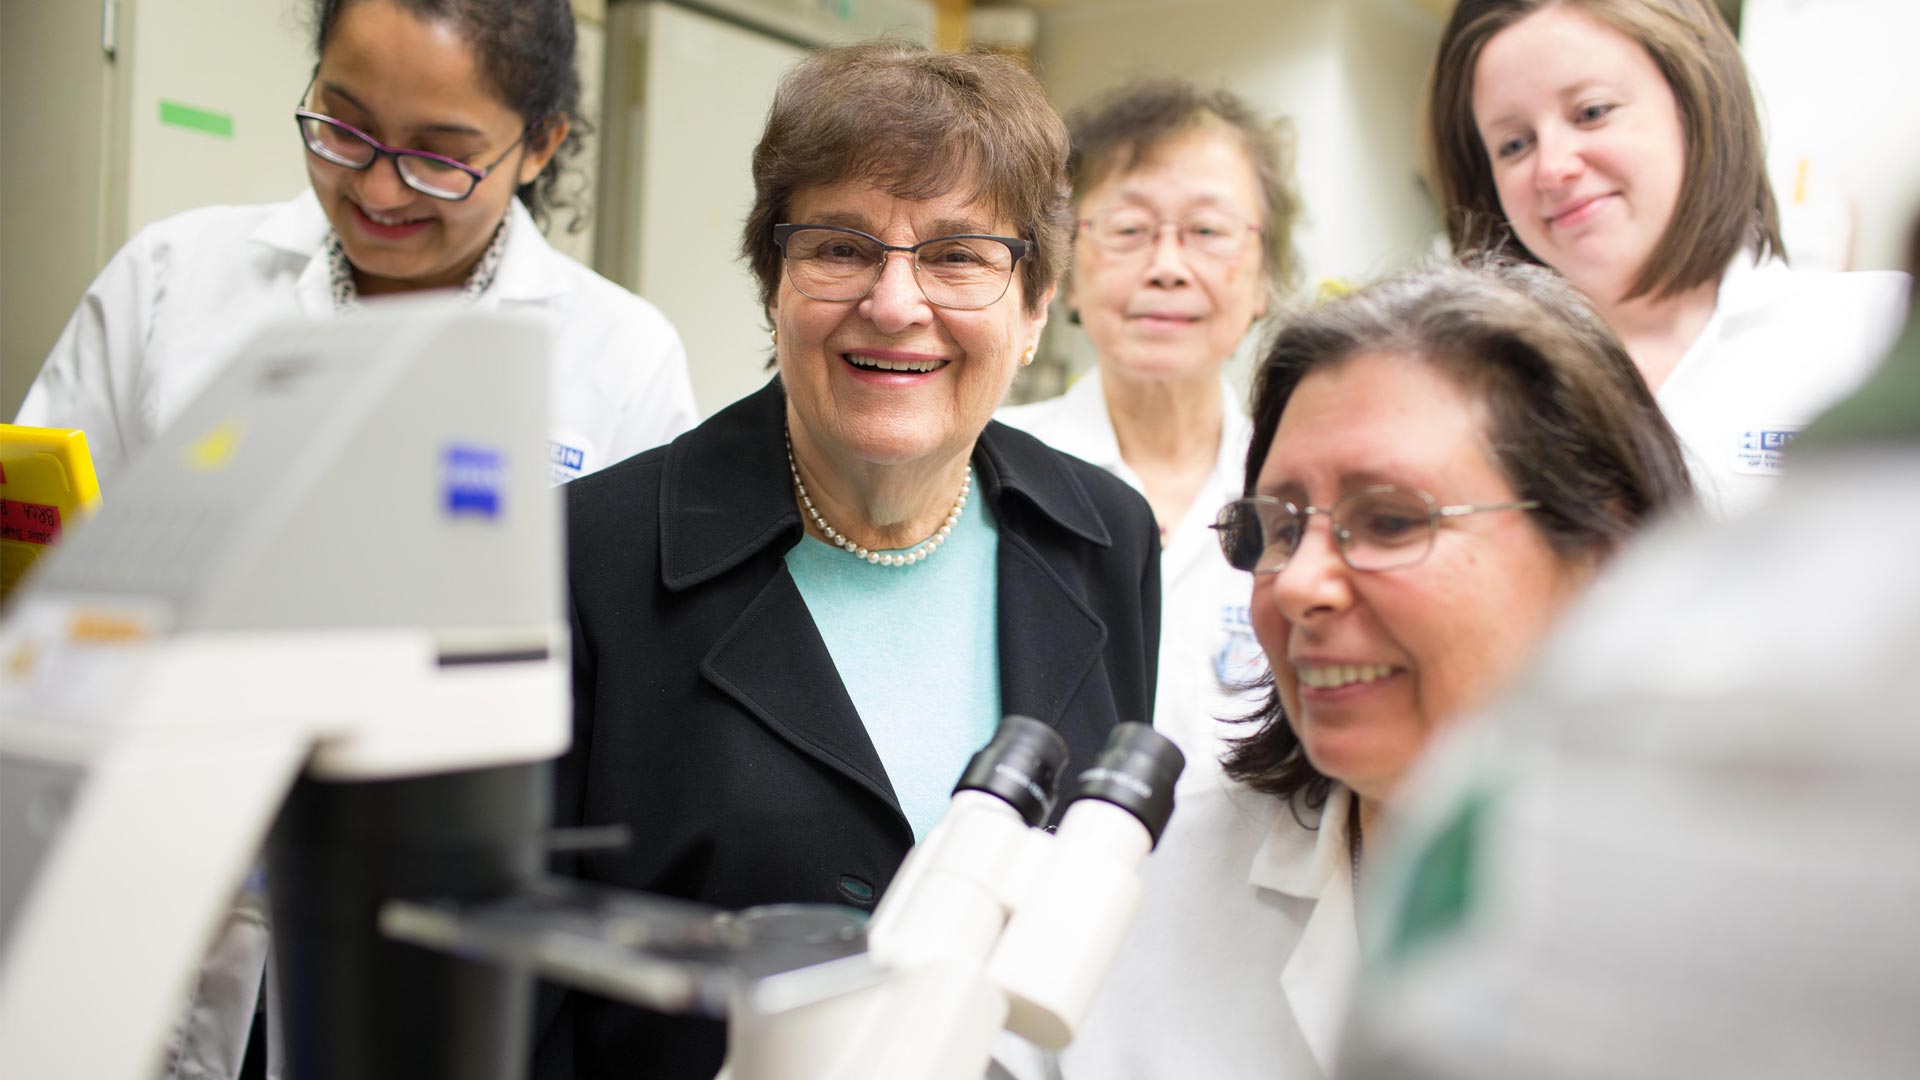 Susan Band Horwitz Wins Prestigious Cancer Research Award for Anti-Tumor Drug Discovery